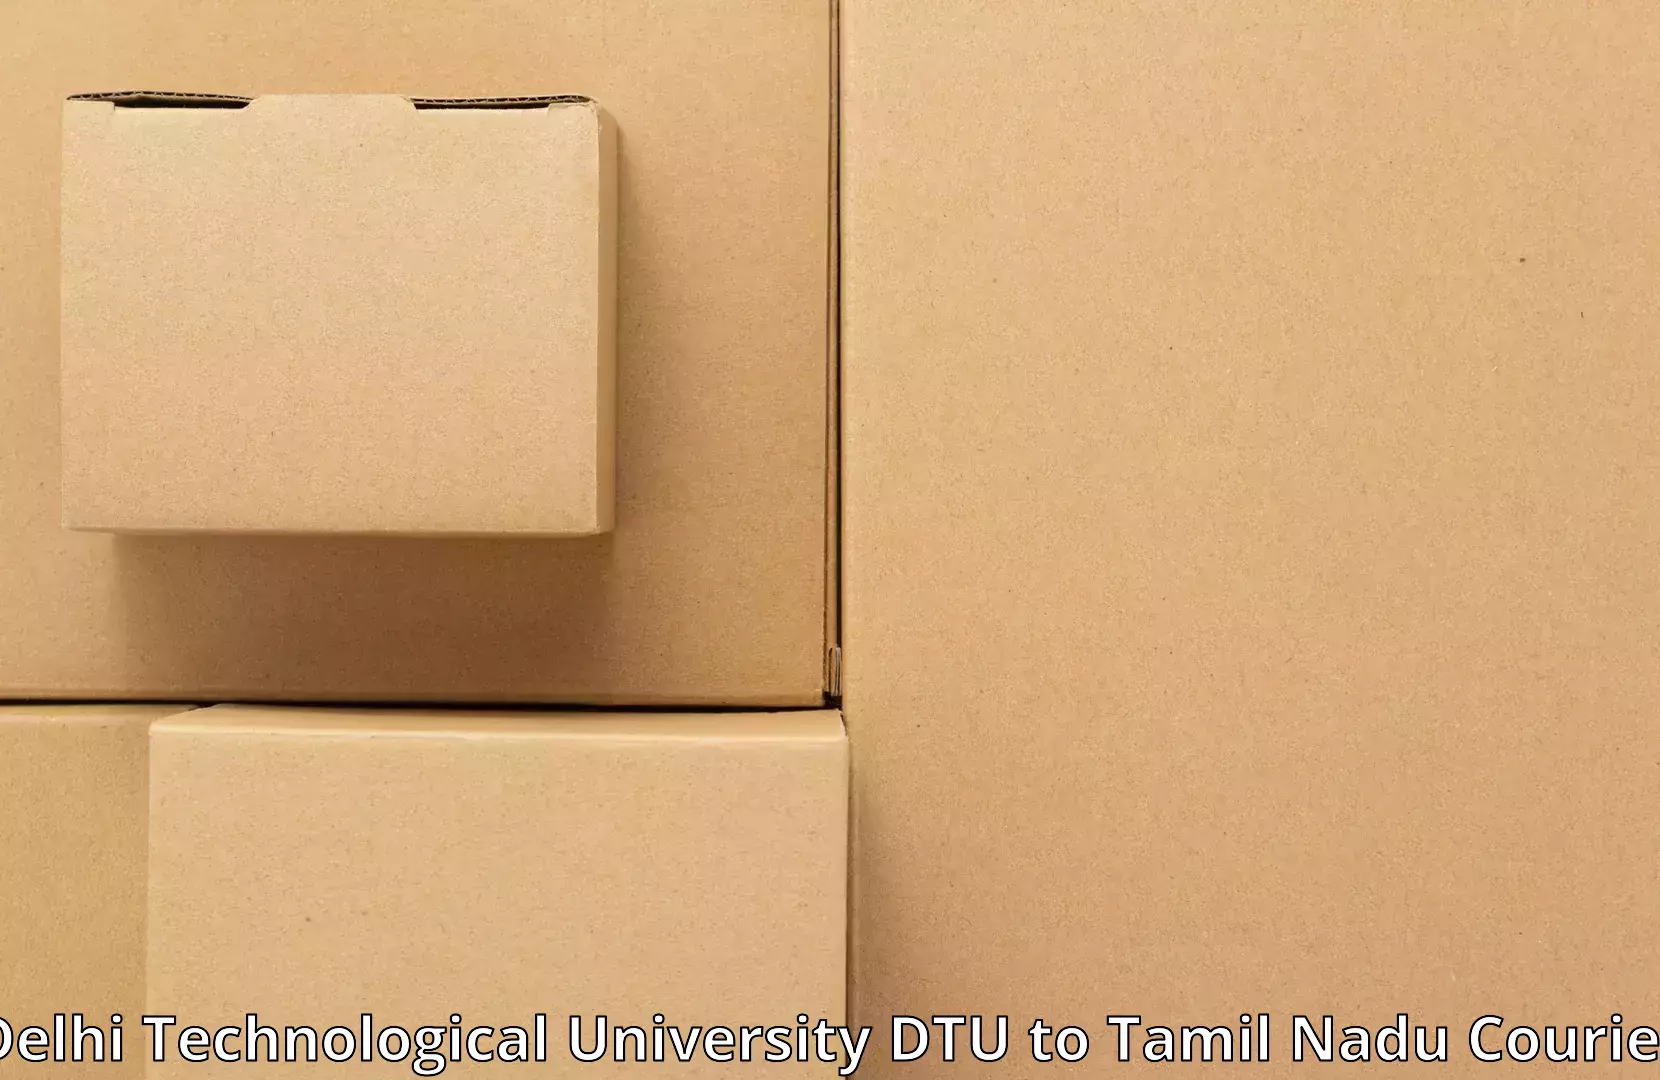 Moving and handling services in Delhi Technological University DTU to Chennai Port